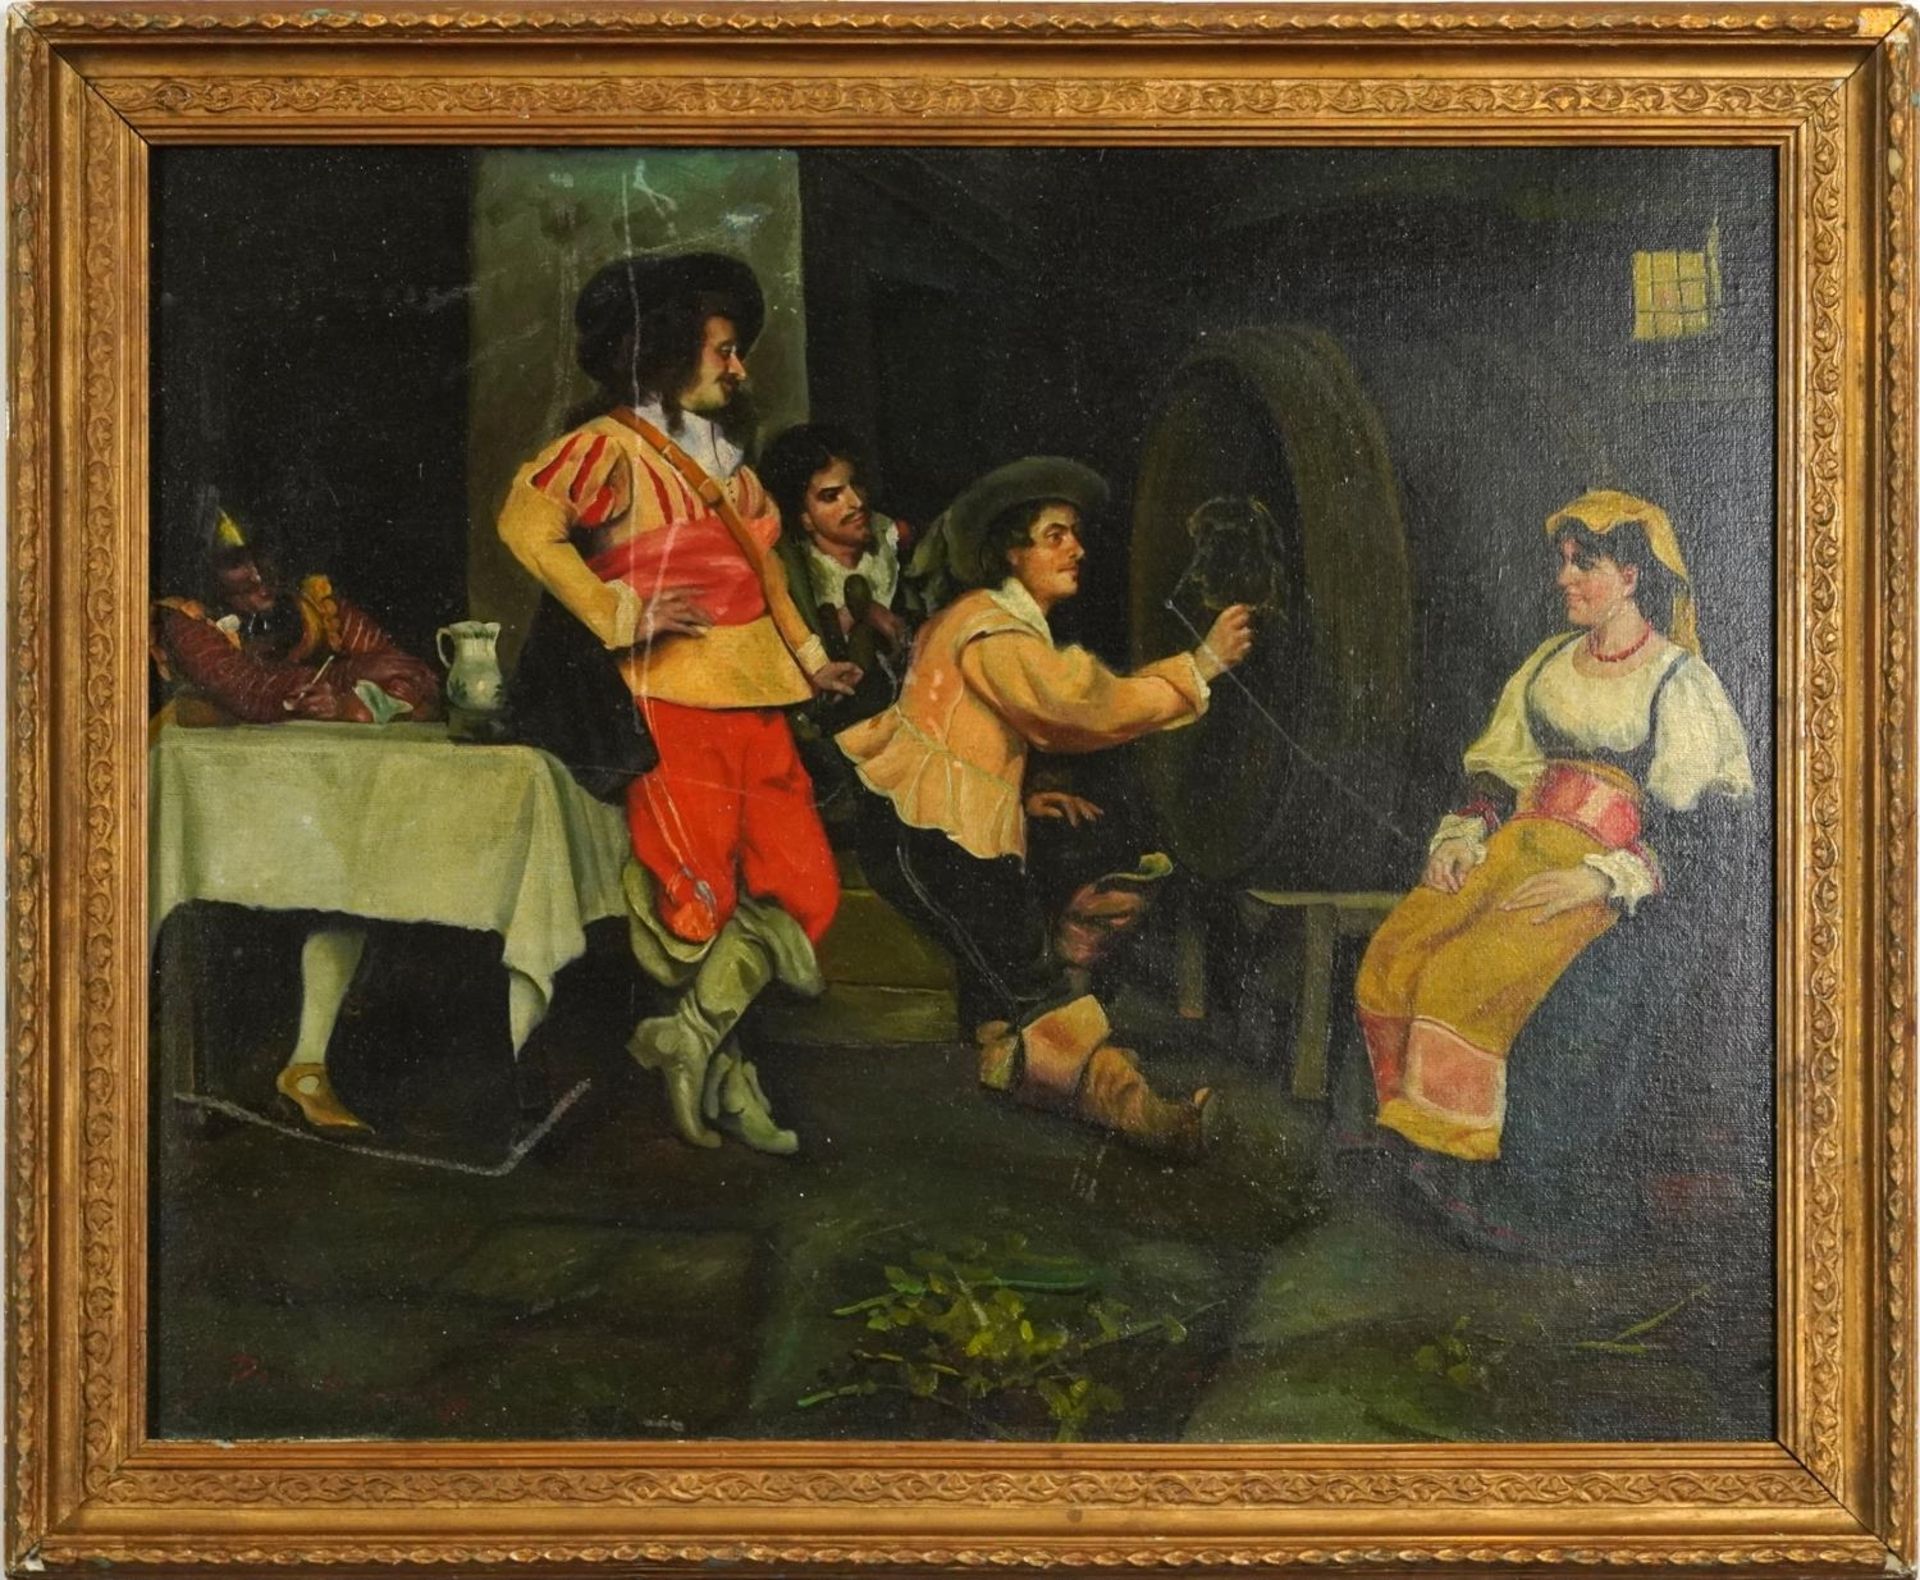 Tavern scene with Cavaliers, Old Master style oil on board, mounted and framed, 54cm x 42.5cm - Image 2 of 4